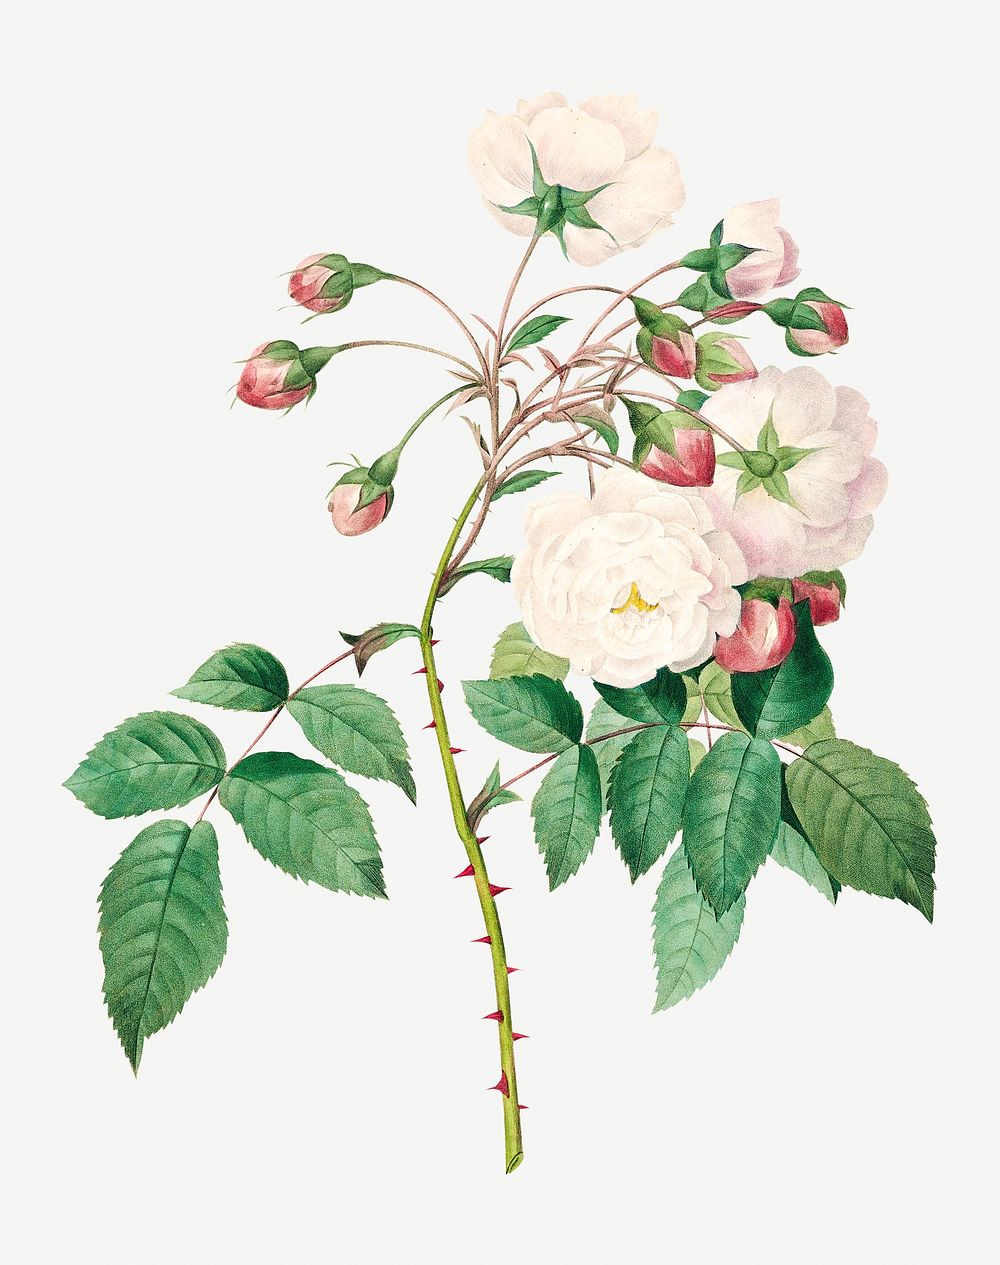 Rose adelaide flower psd botanical illustration, remixed from artworks by Pierre-Joseph Redout&eacute;